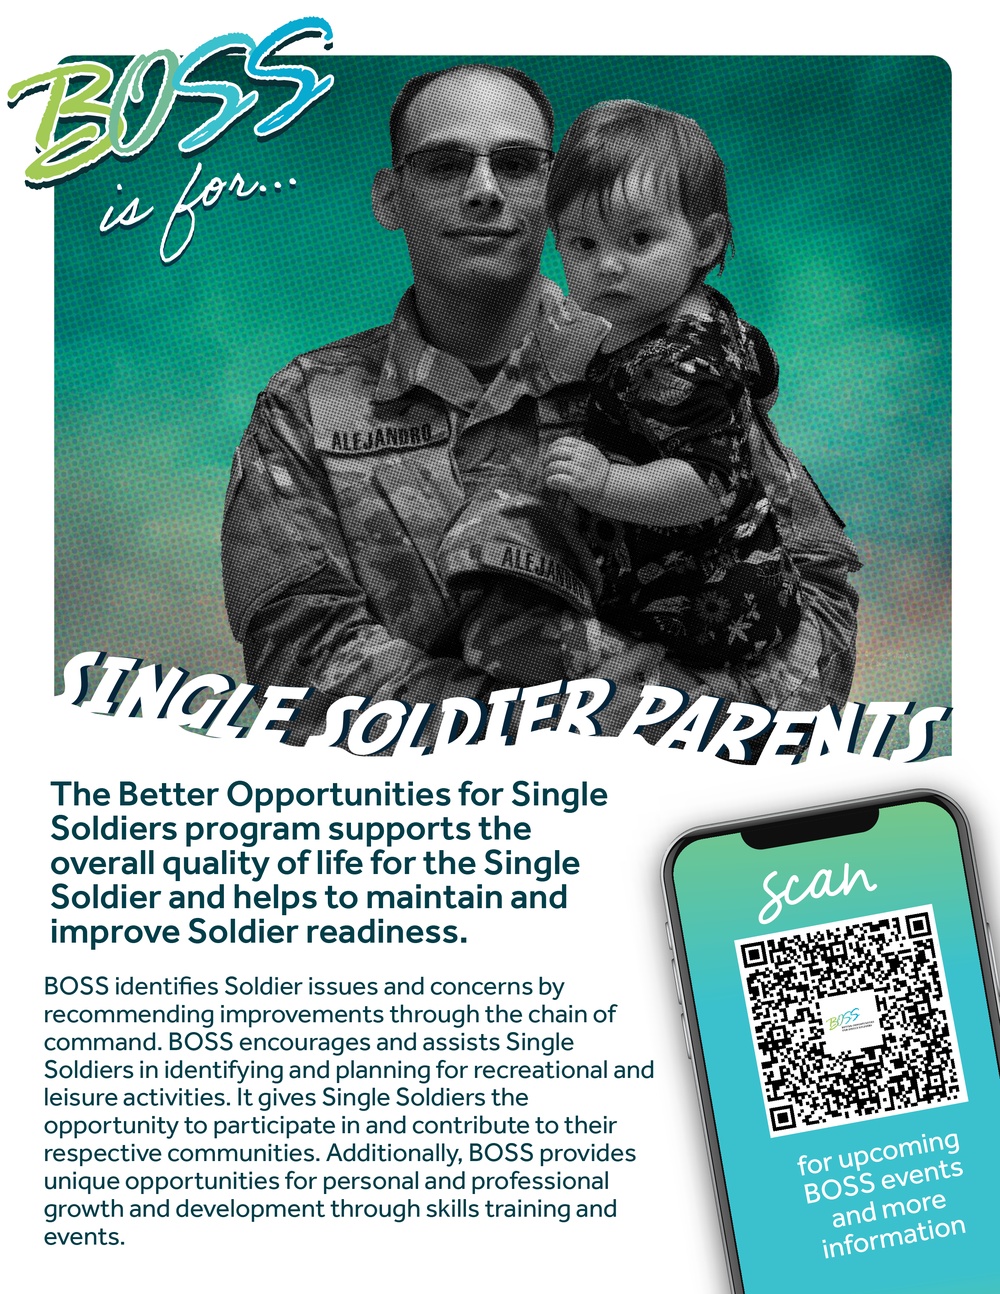 Better Opportunities for Single Soldiers Information Campaign